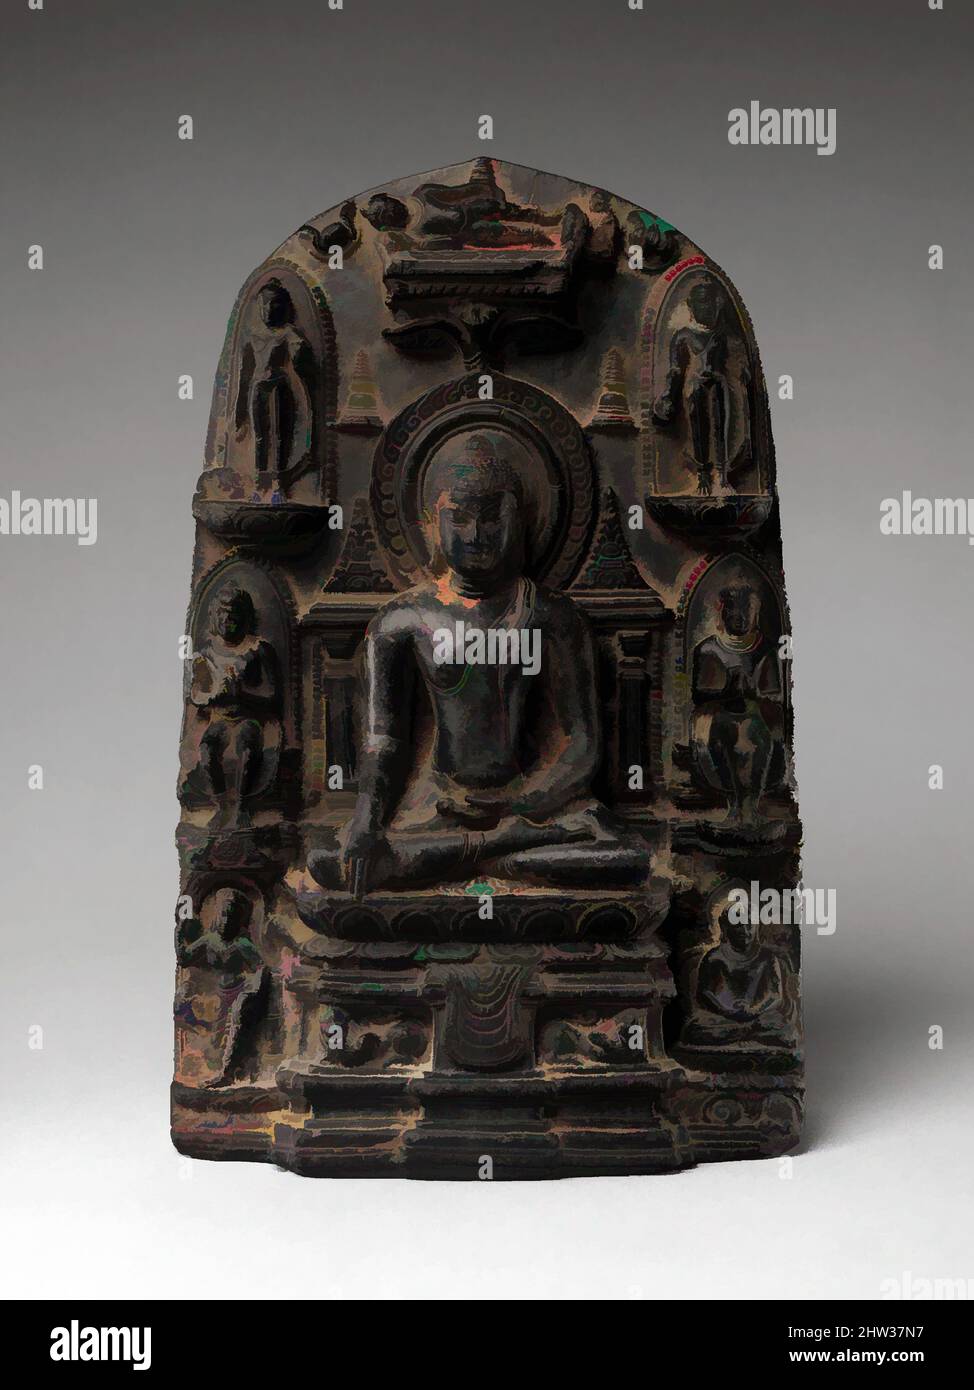 Art inspired by Stele with Eight Great Events from the Life of the Buddha, Pala period, 10th century, India, Bihar, possibly from Nalanda, Black schist with traces of gilding, H. 11 1/16 in. (28.1 cm); W. 7 in. (17.8 cm); D. 3/4 in. (1.9 cm); Wt. 11 lbs (5 kg), Sculpture, Most, Classic works modernized by Artotop with a splash of modernity. Shapes, color and value, eye-catching visual impact on art. Emotions through freedom of artworks in a contemporary way. A timeless message pursuing a wildly creative new direction. Artists turning to the digital medium and creating the Artotop NFT Stock Photo